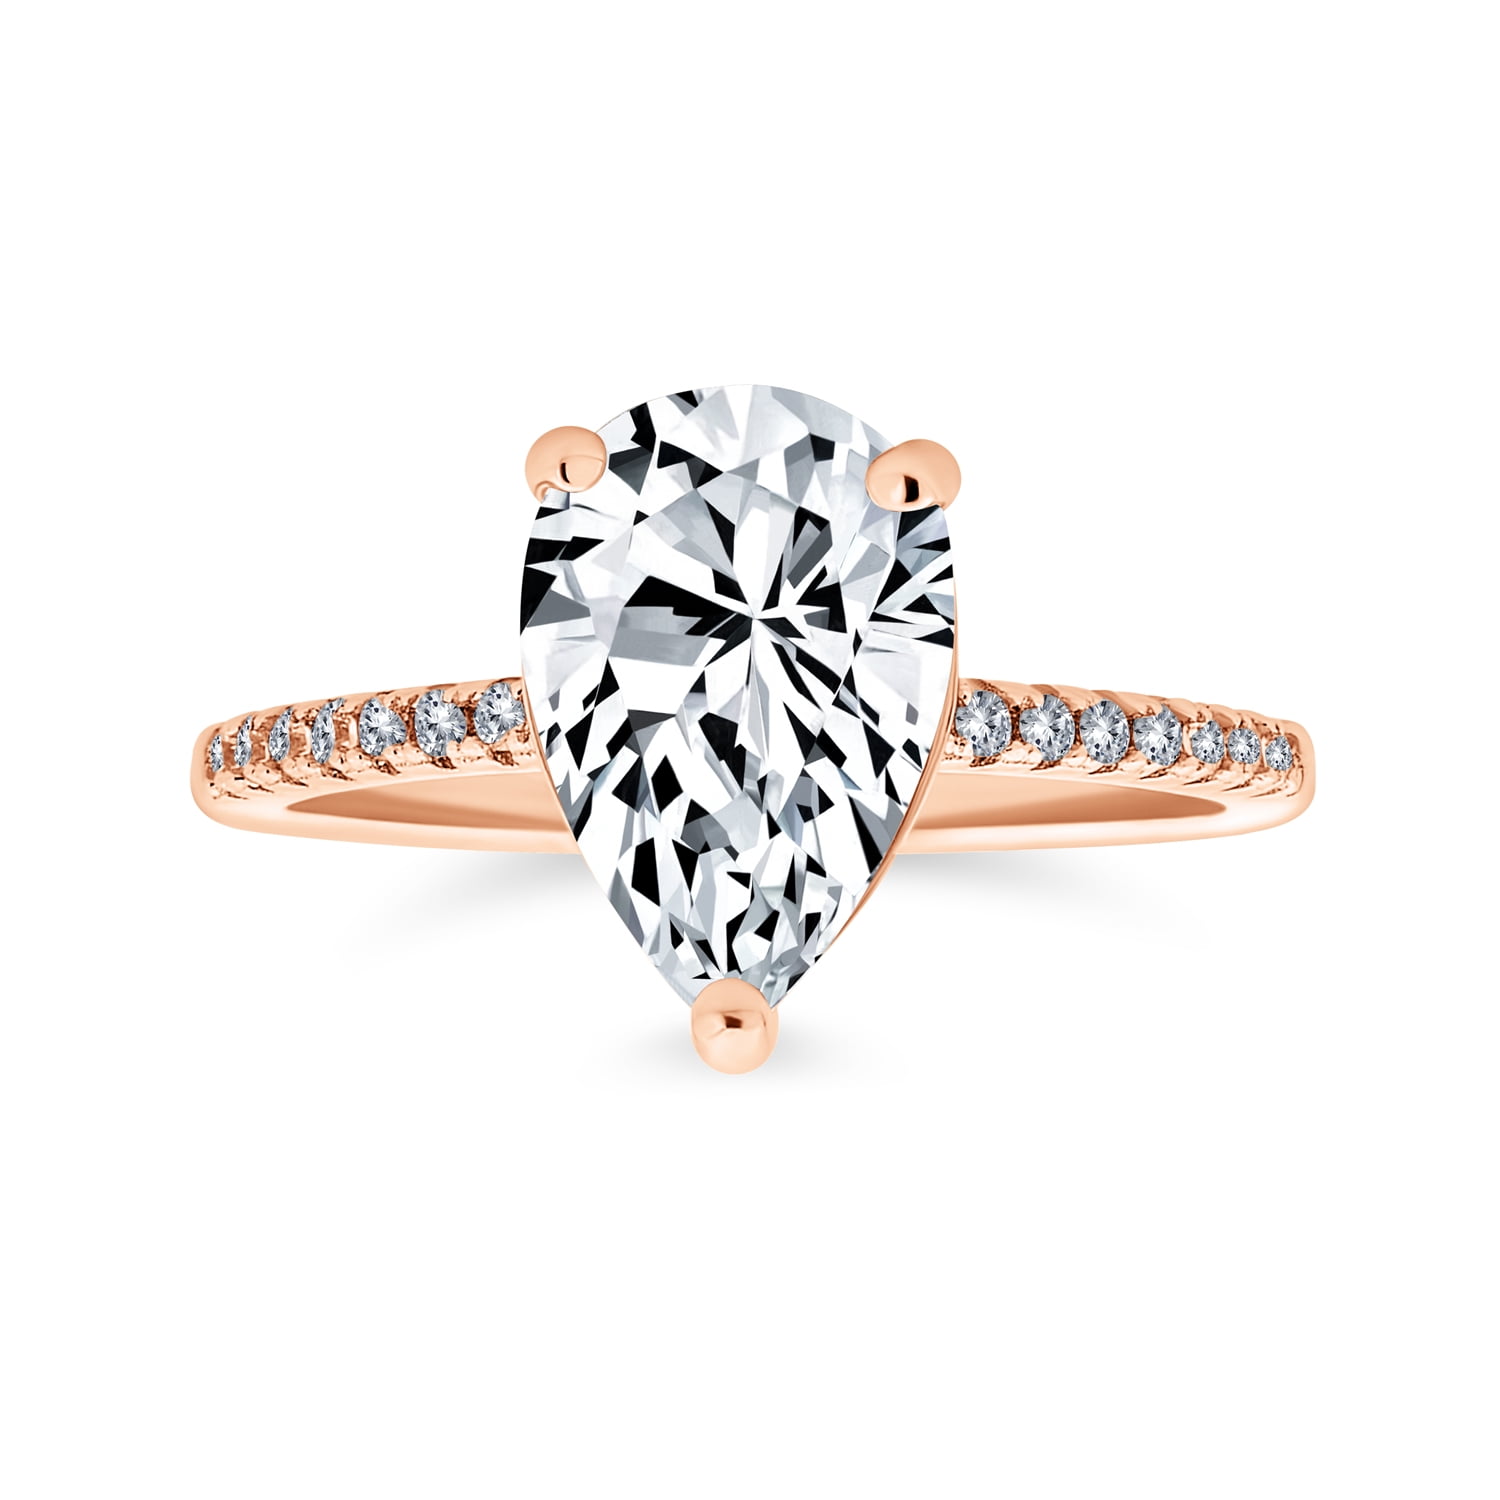 Band Ring 925 Sterling Silver 14K Rose Gold Over Cubic Zirconia CZ Size 8 Ct 3.3